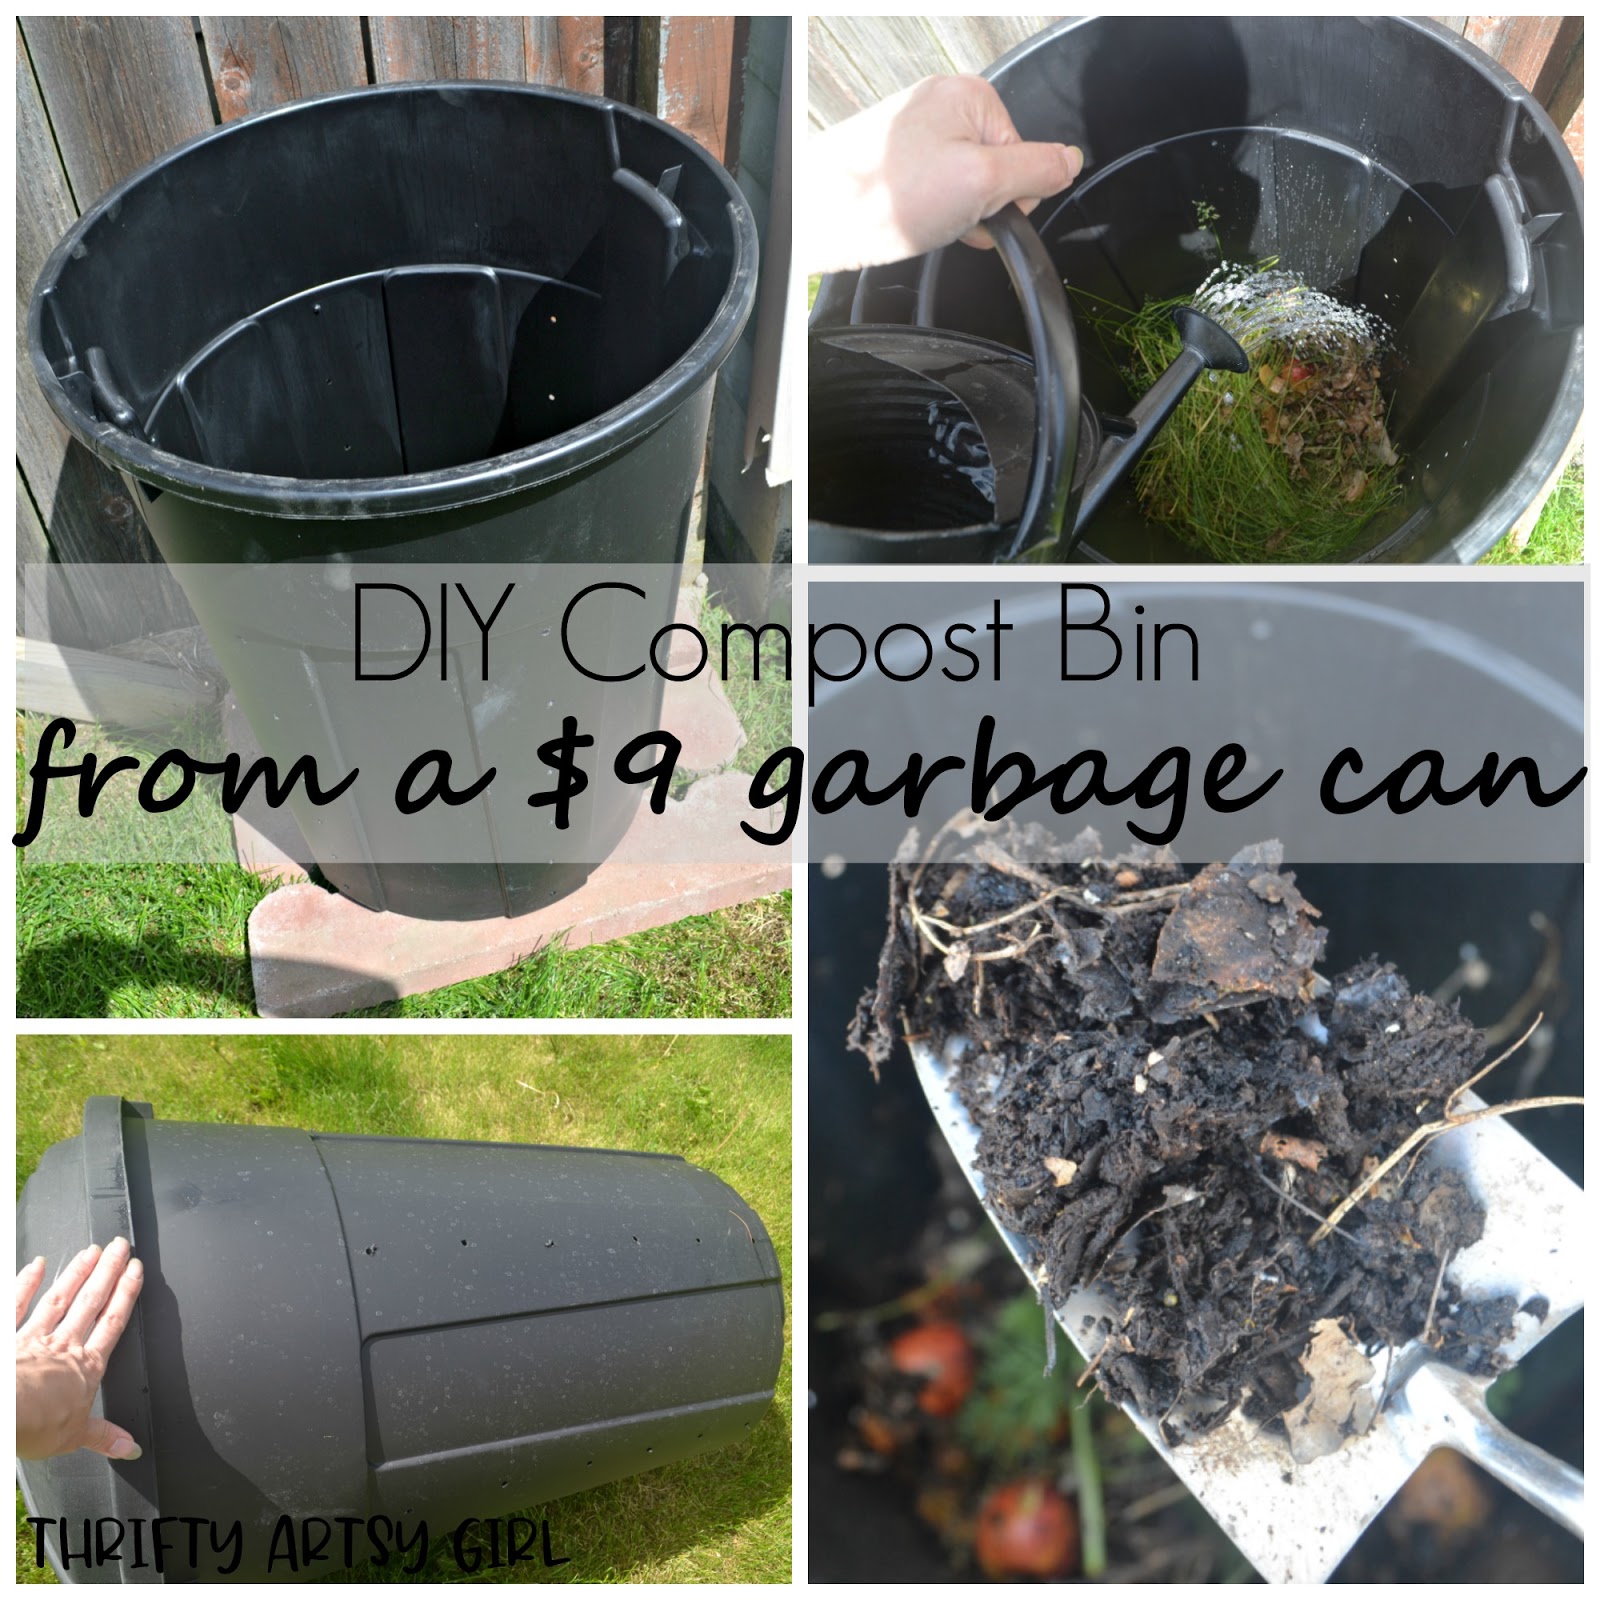 Thrifty Artsy Girl: How to Make a Compost Bin from a $9 Garbage Can